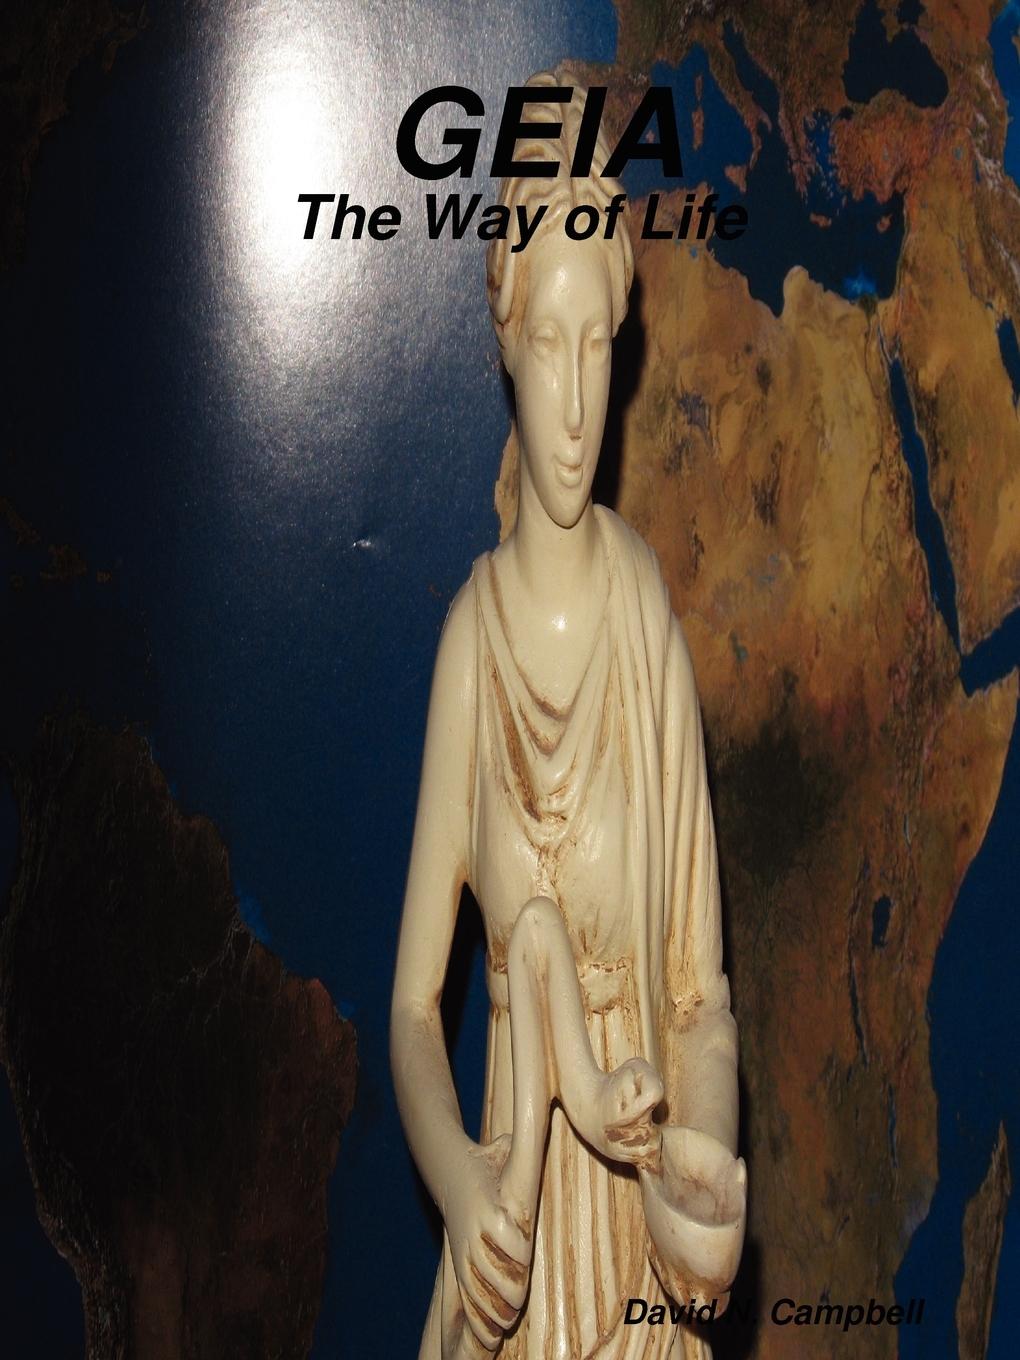 Geia-The Way of Life - Campbell, David N.